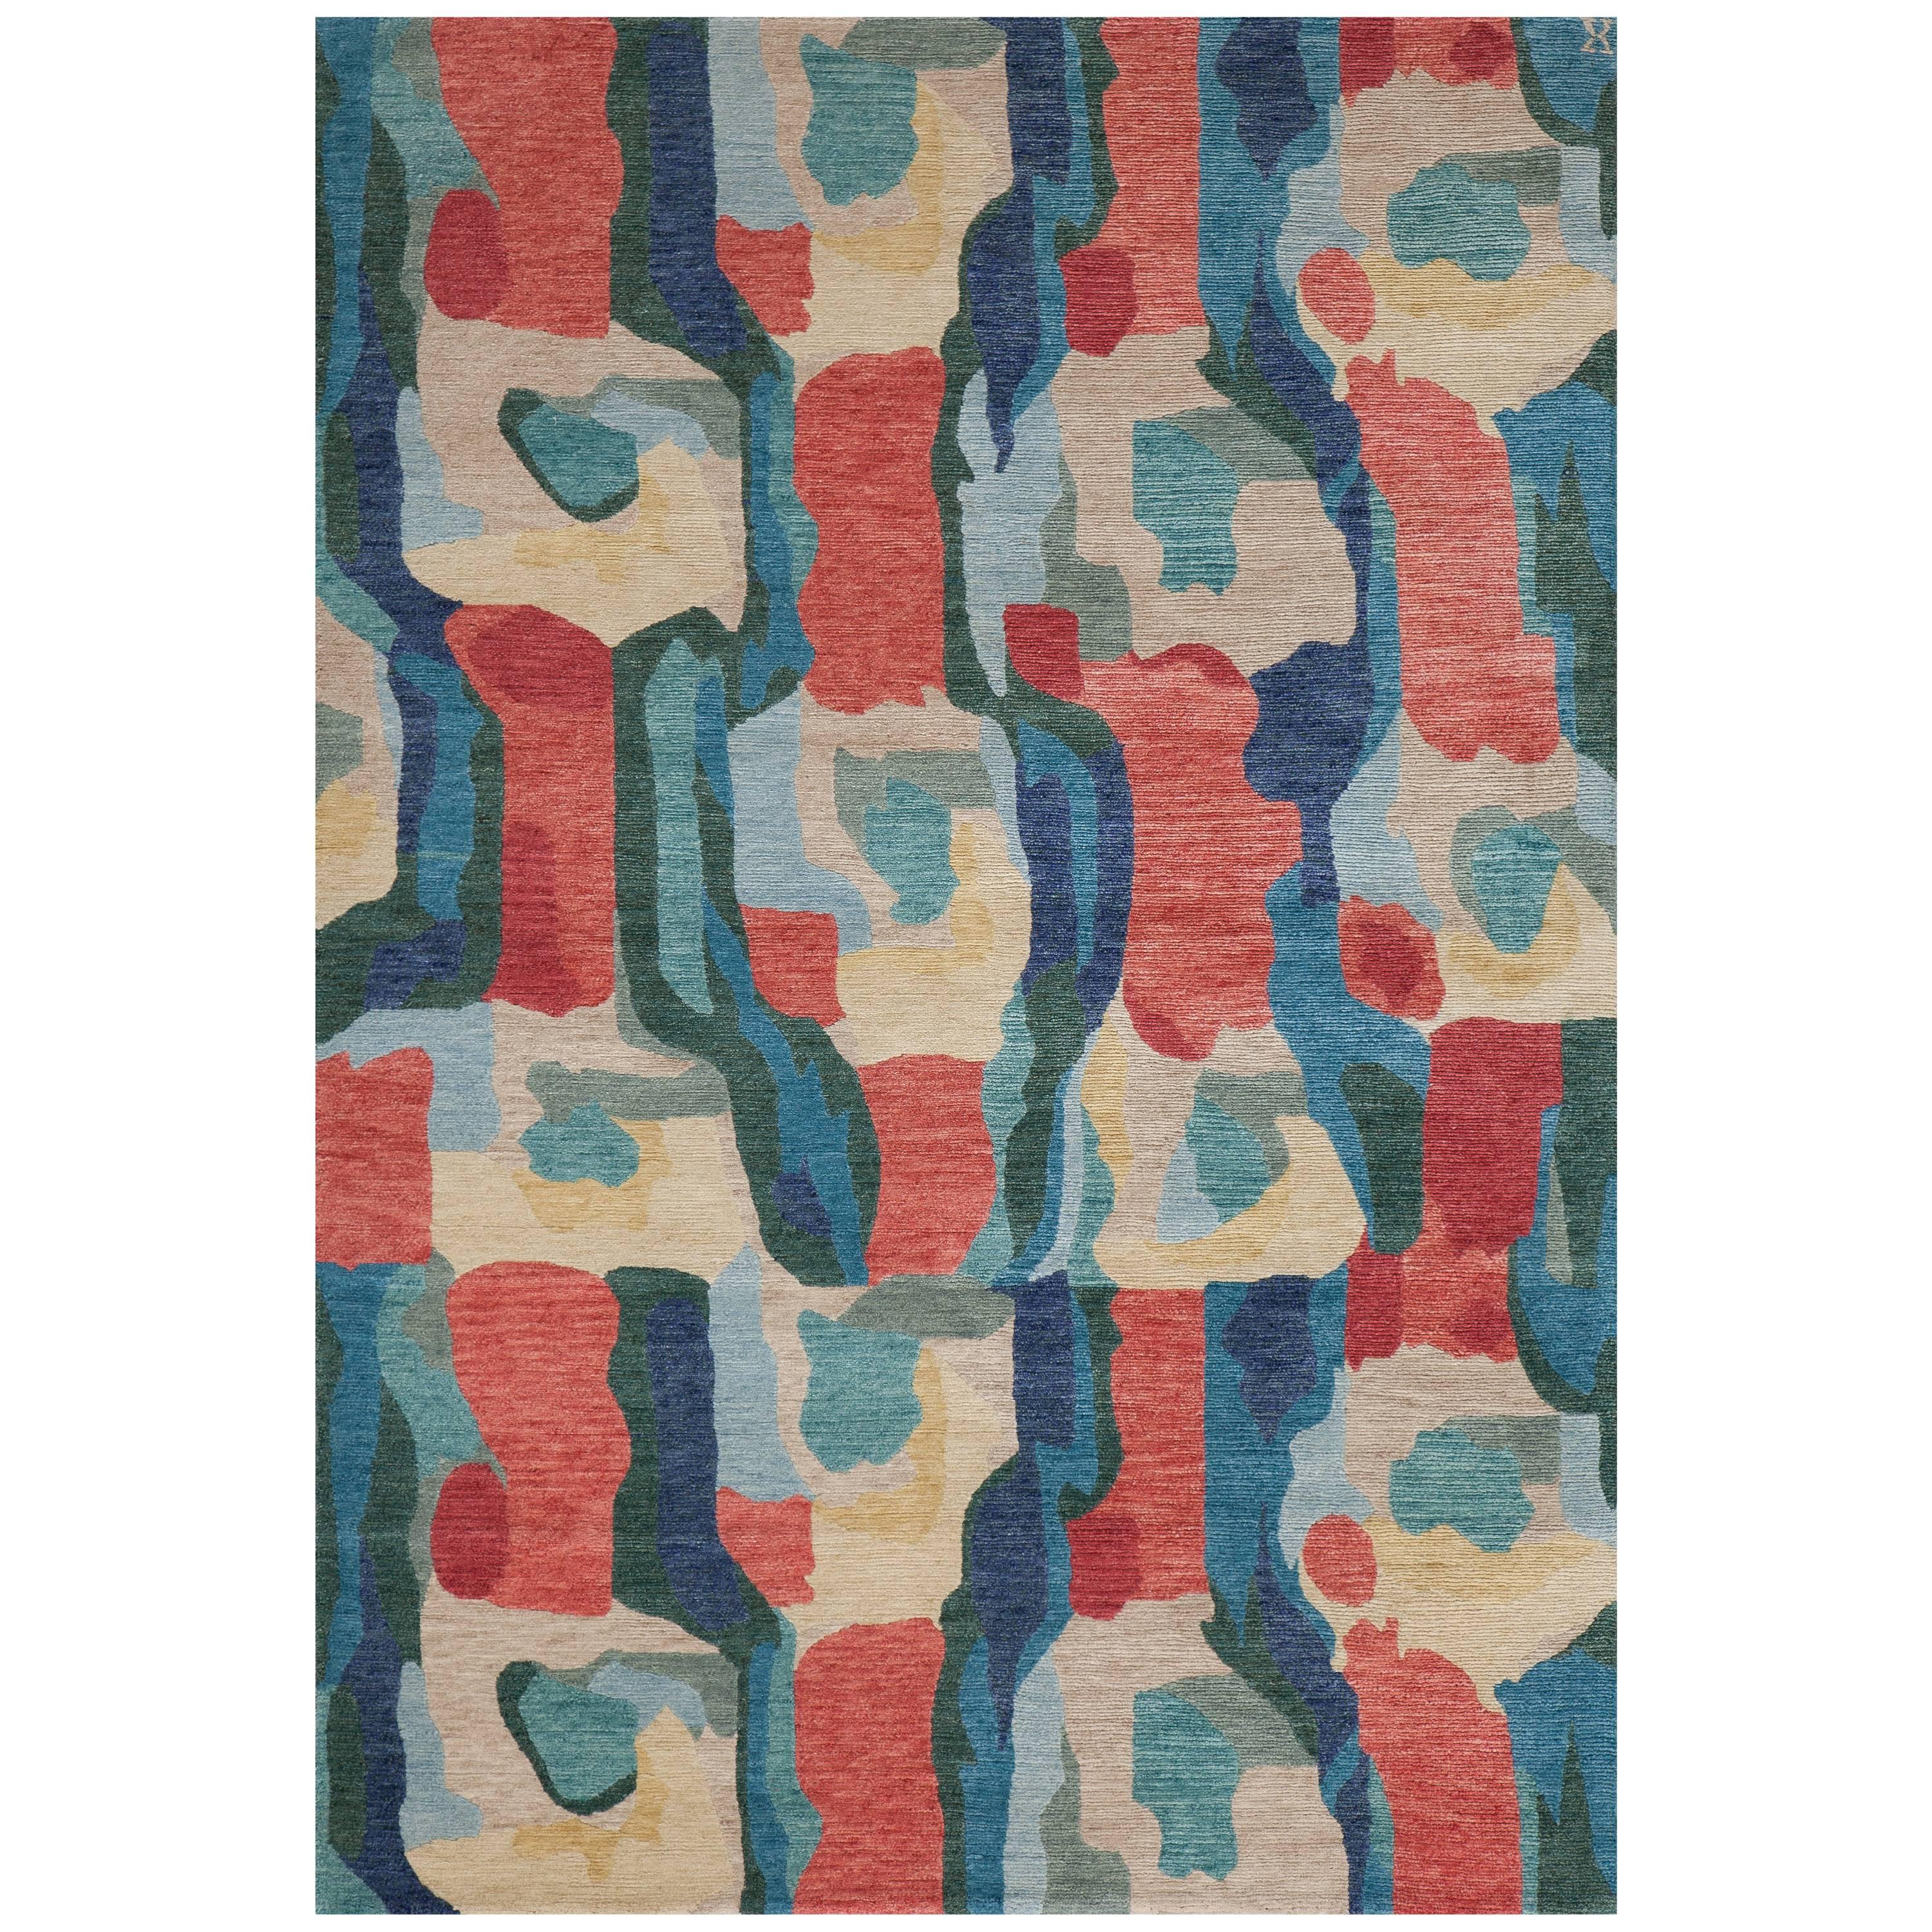 'Kigali, Red/Indigo' Hand-Knotted Tibetan Rug Made in Nepal by New Moon Rugs For Sale